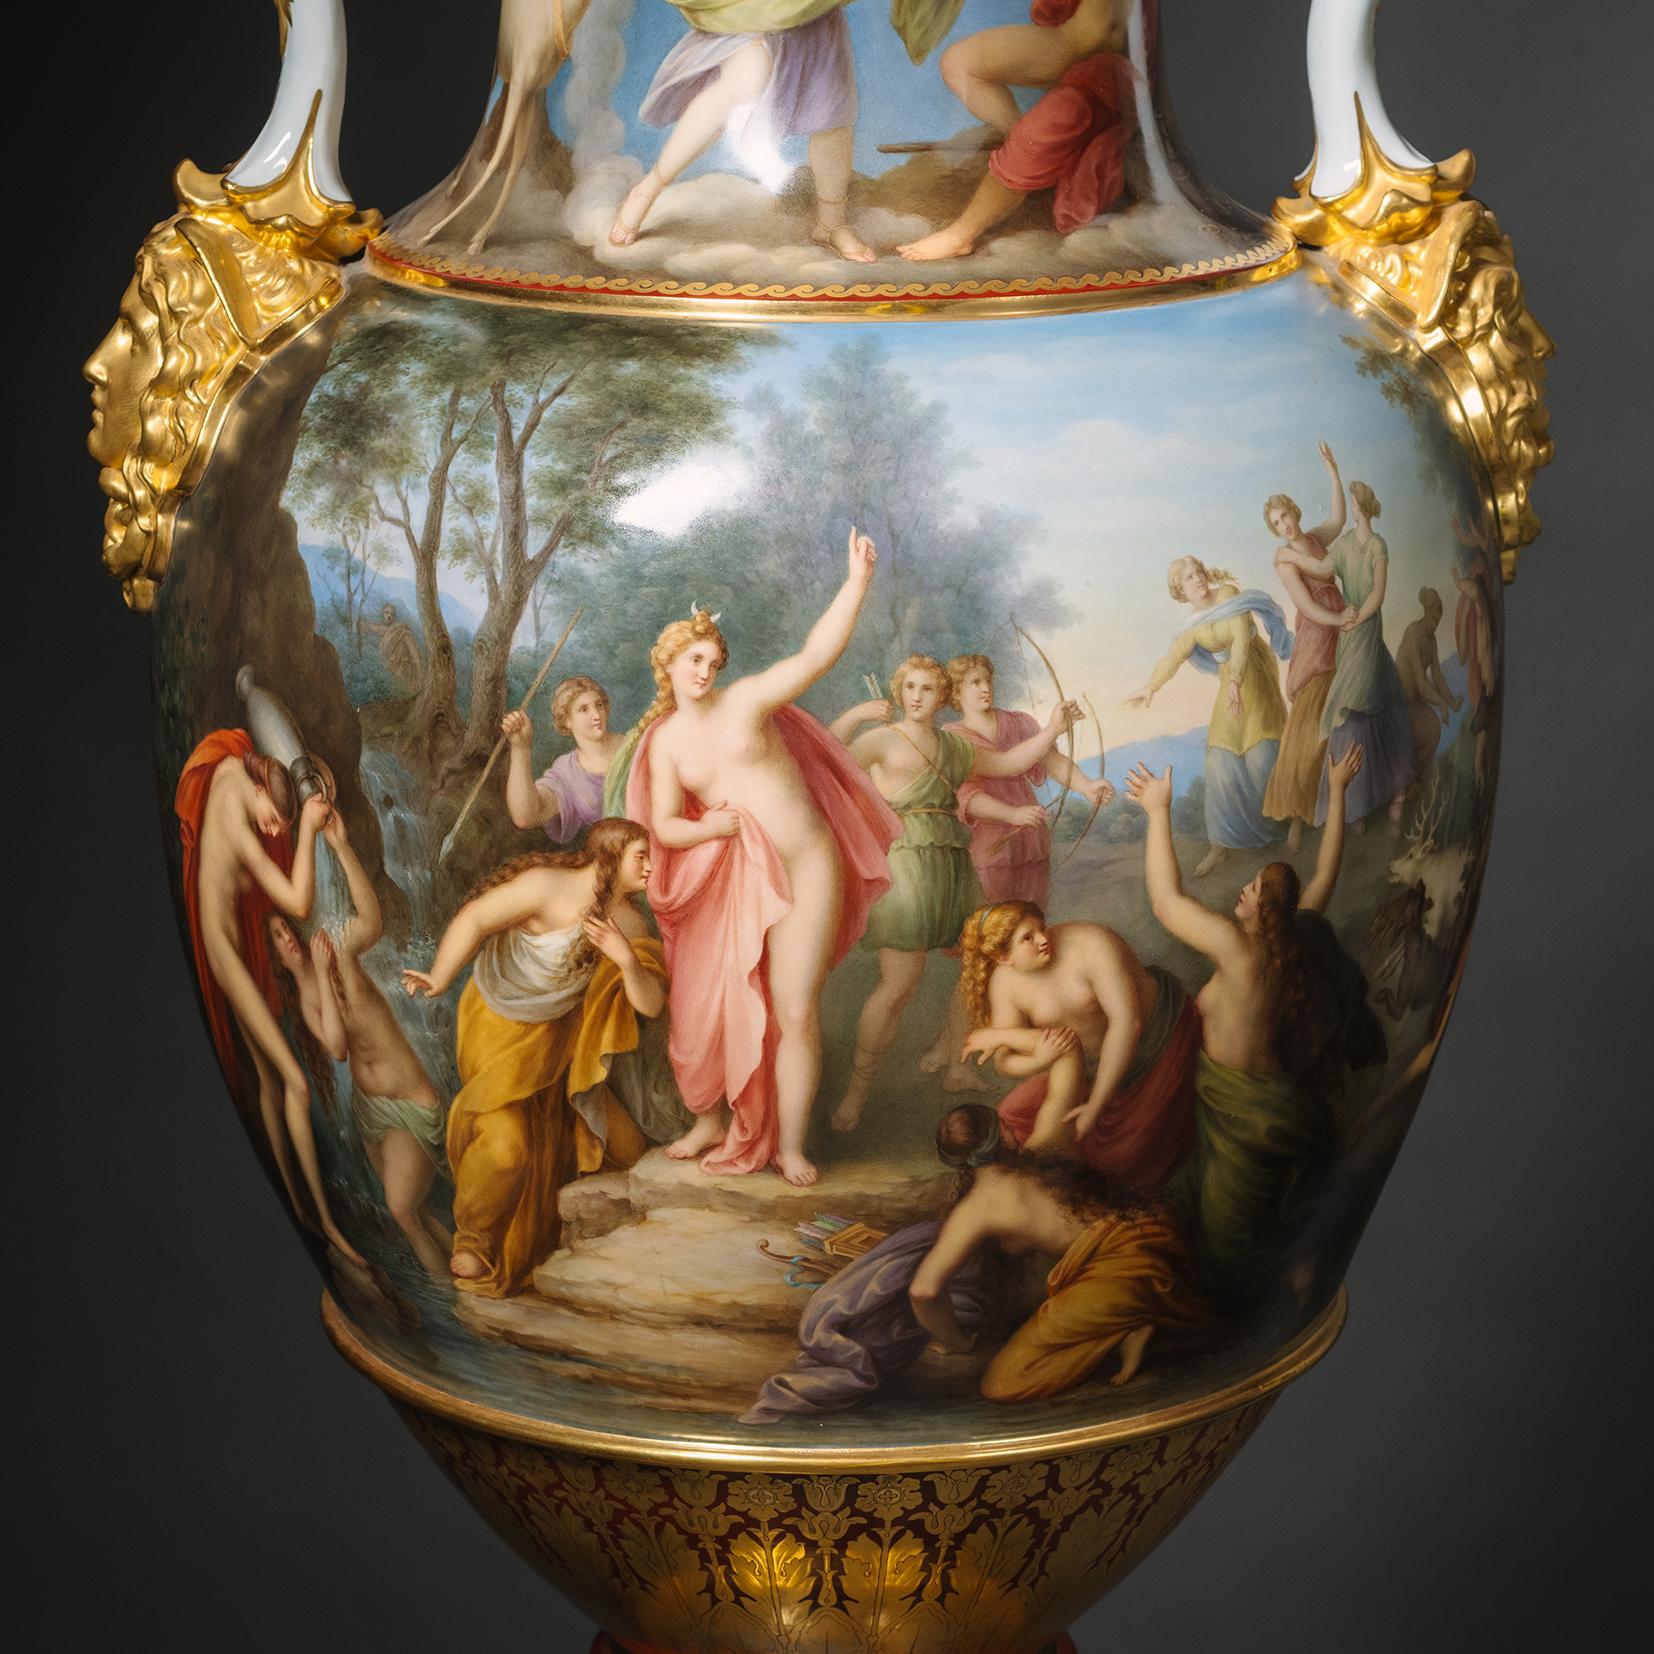 The ‘Diana and Actaeon’ Vase
A Large Meissen Porcelain Two Handled Vase, Painted By Julius Schnorr von Carolsfeld (1794-1872). Model Number G.103.

The body finely painted with a continuous mythological scene of ‘Diana and Actaeon’ above flowerhead